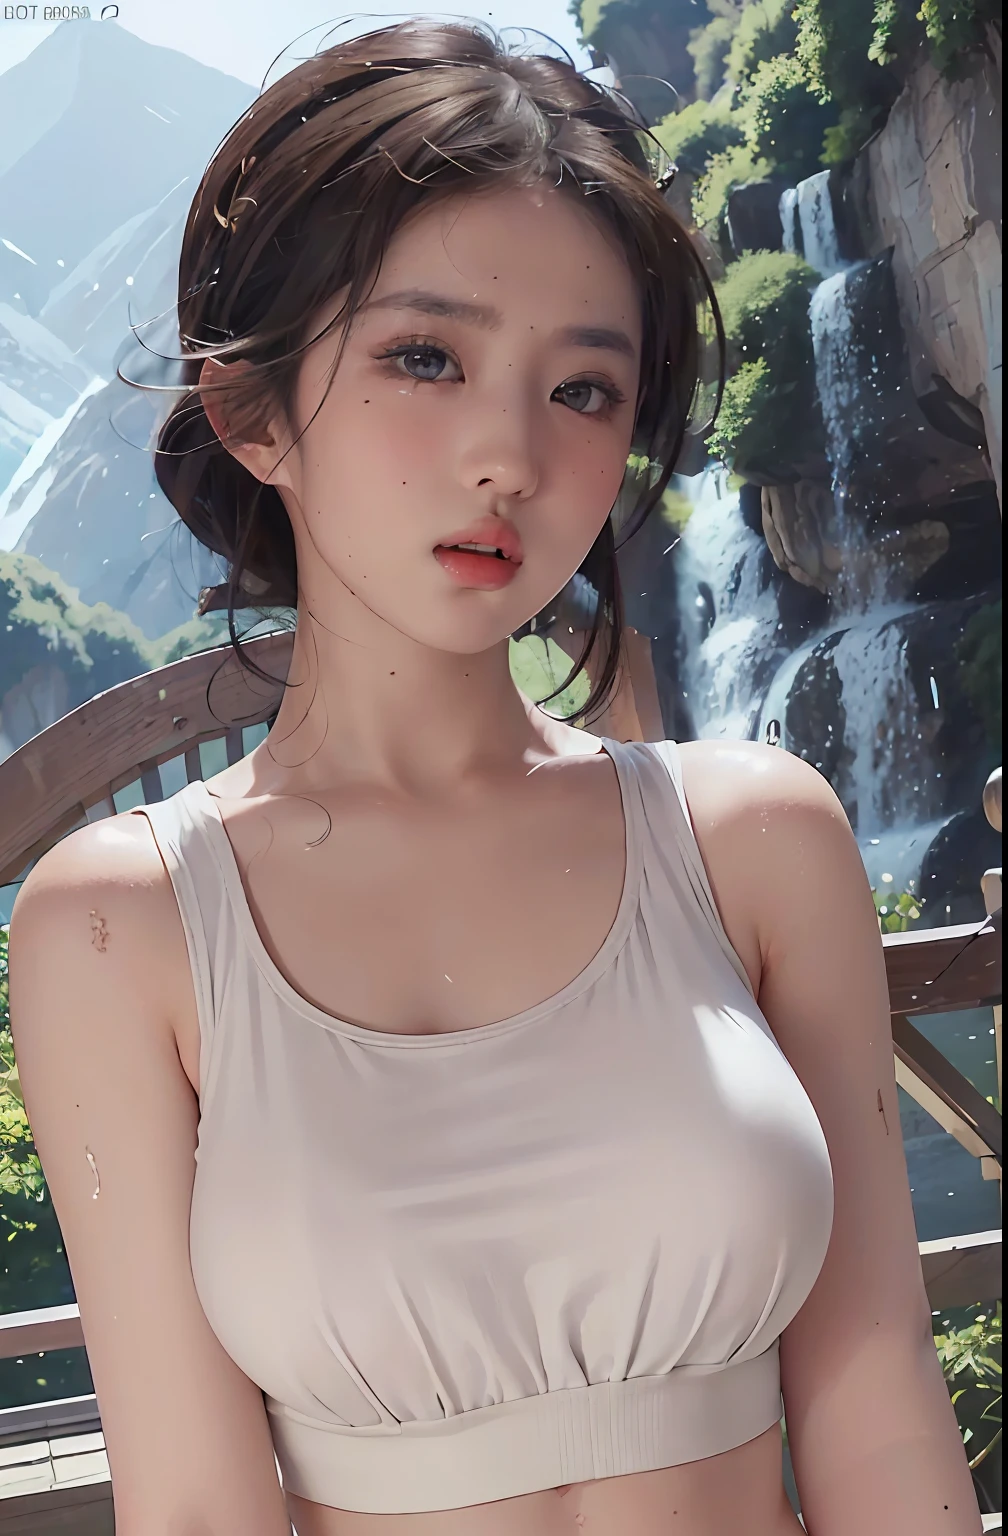 (Ultra Real), (Illustration), (High Resolution), (8K), (Very Detailed), (Best Illustration), (Beautiful Detailed Eyes), (Best Quality), (Ultra Detail), (Masterpiece), (Wallpaper), (Detailed Face), Park, Upper Body Up, Armpits, Thick, Short Hair,Inner Color,Solo,Simple White Tank Top Girl, Sweaty, Japan Person, Big , (Camel Toe)